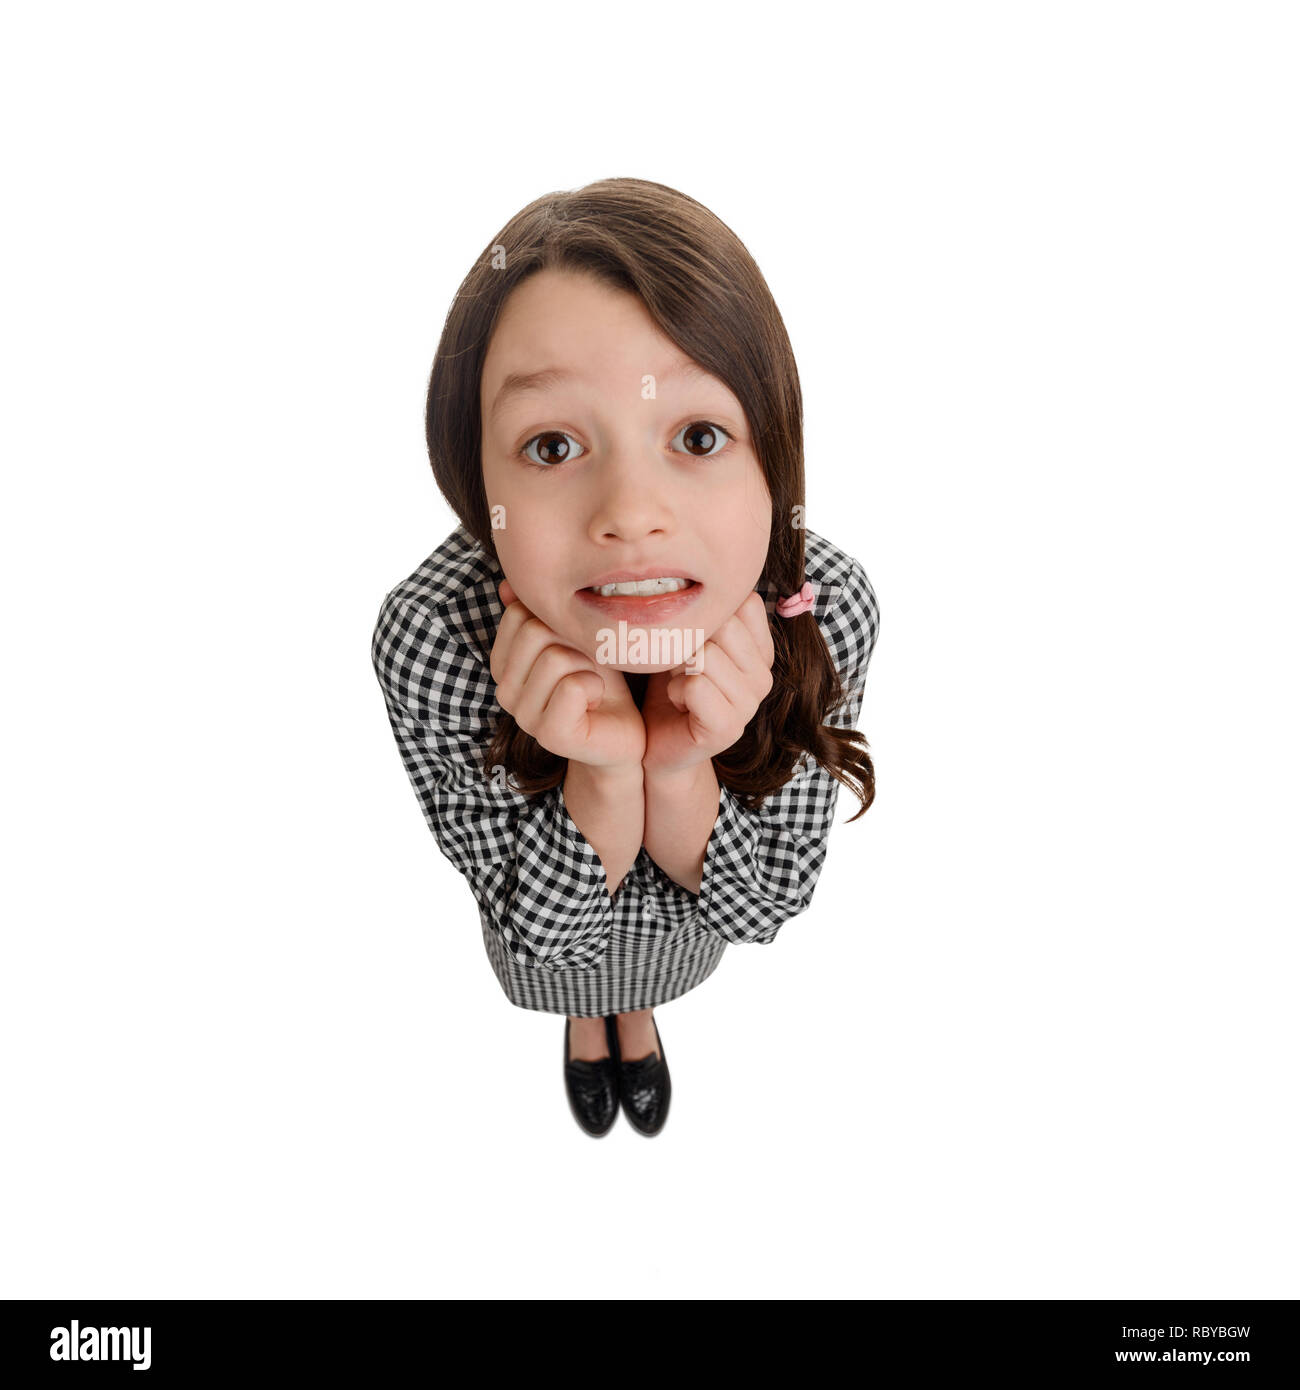 Child asking for forgiveness Stock Photo